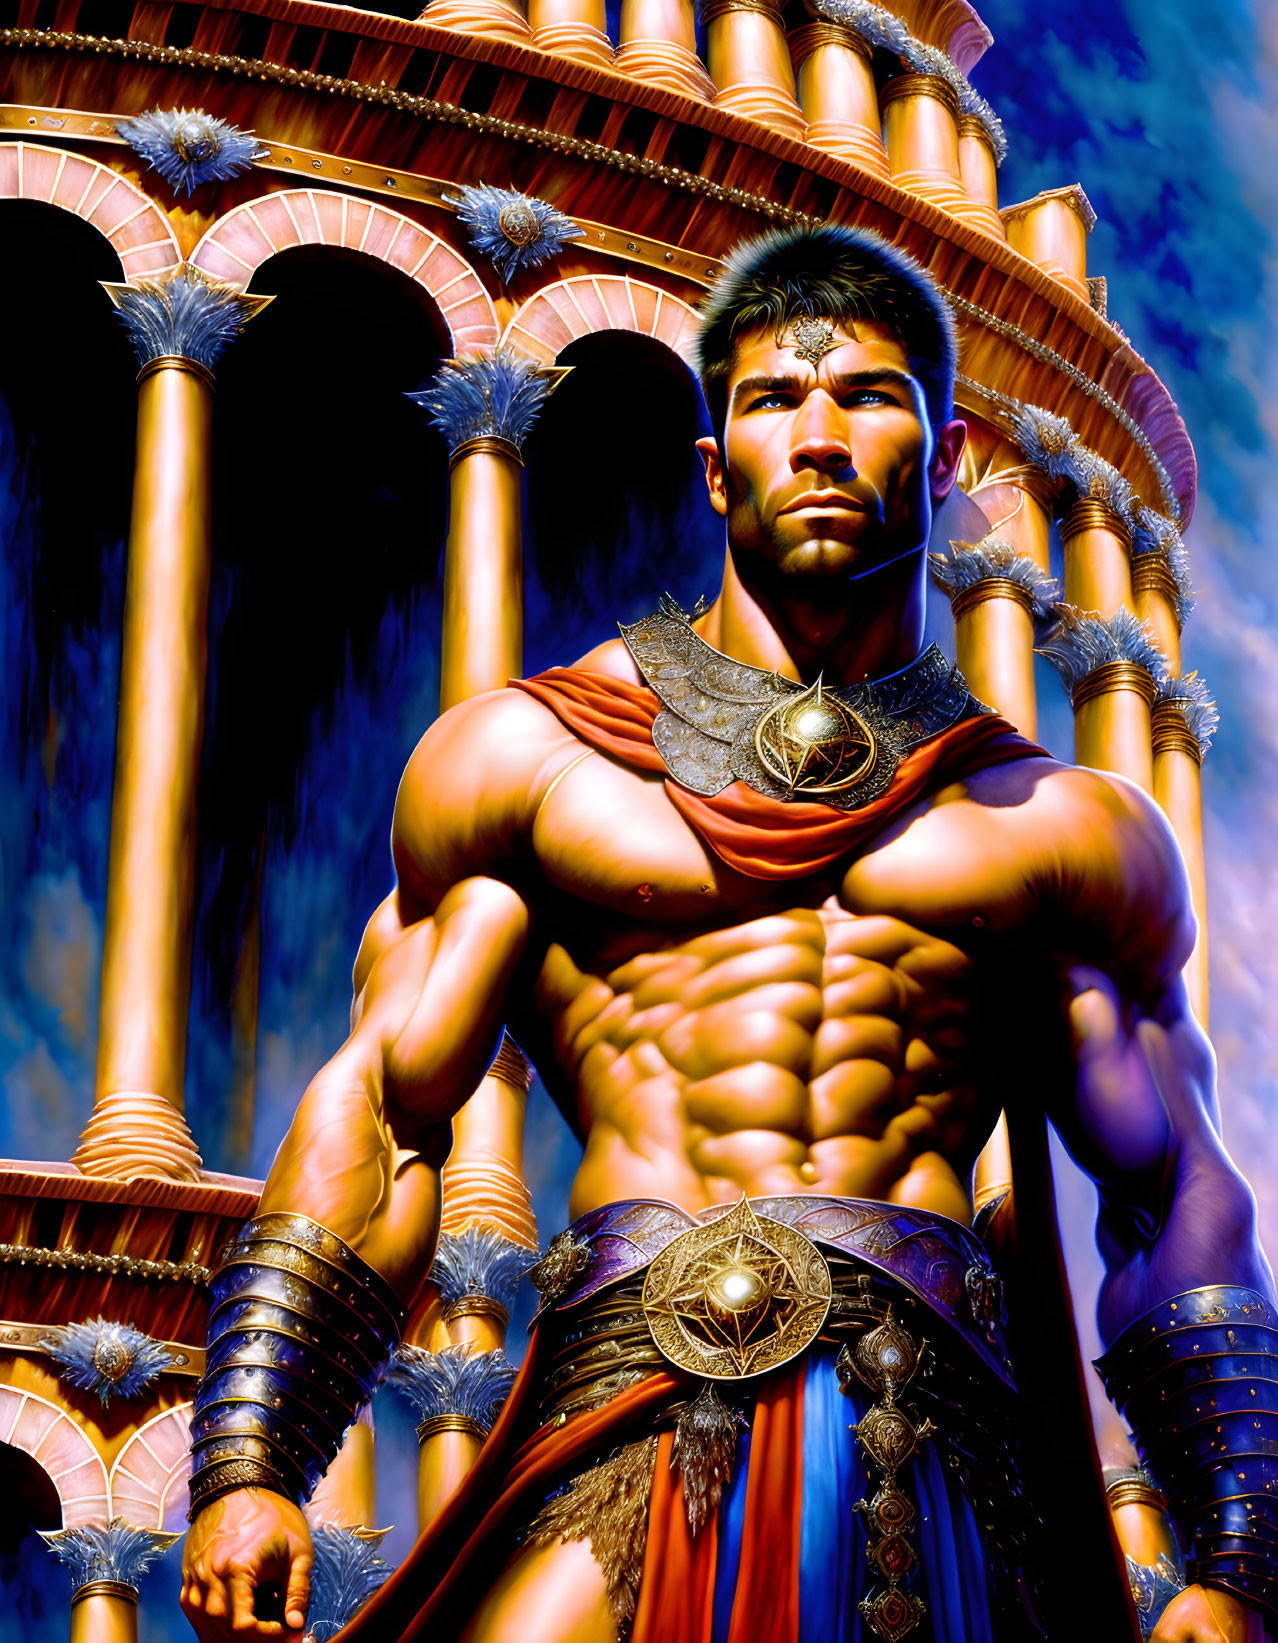 Muscular man in ancient warrior attire at grand fountain structure